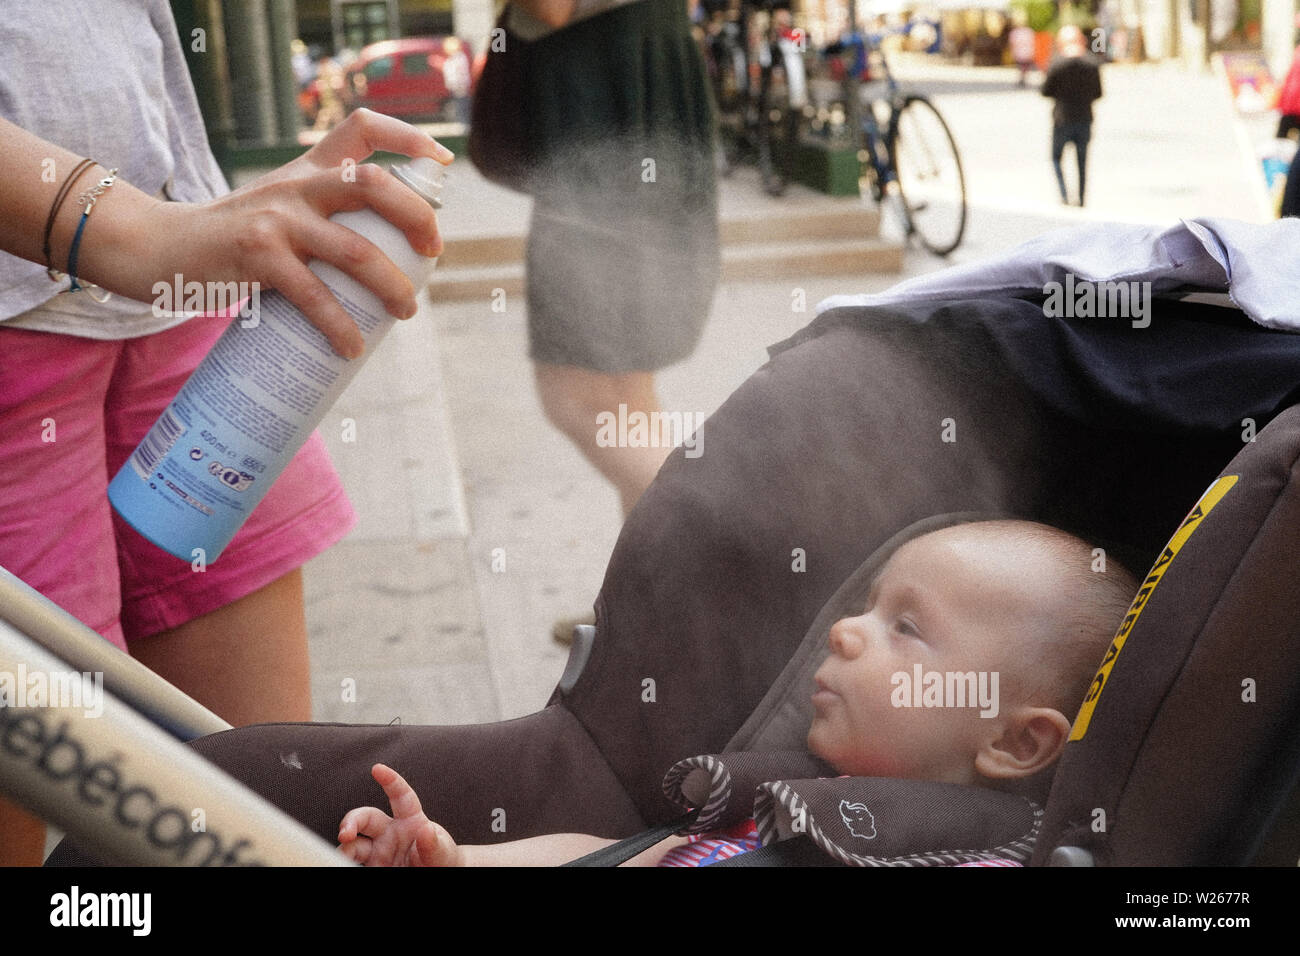 Avignon, France. Saturday, 6 July, 2019. A local, Jacqueline Escolivet, sprays water on her 3-month old baby to keep cool during hot weather during the Avignon theatre festival. Photo: Roger Garfield/Alamy Live News Stock Photo